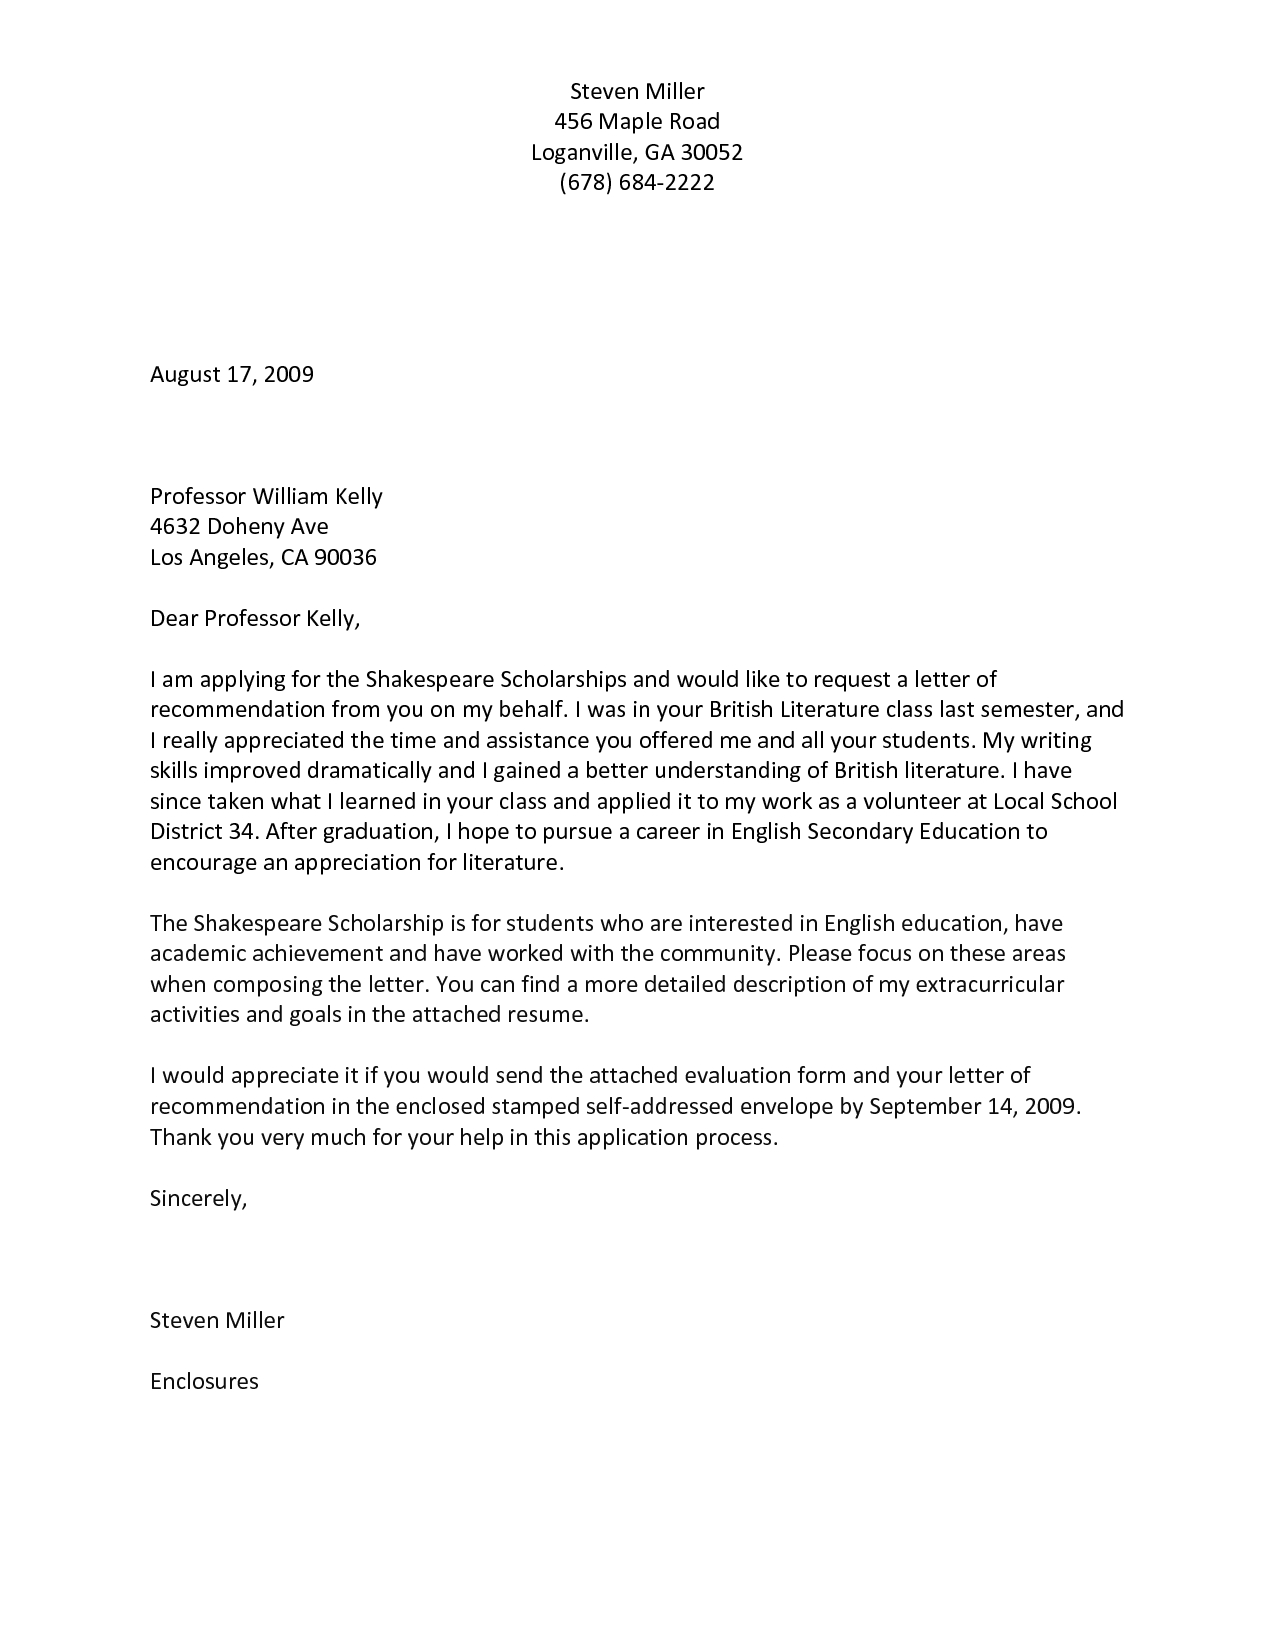 Letter Of Recommendation Request Template Template Business throughout size 1275 X 1650